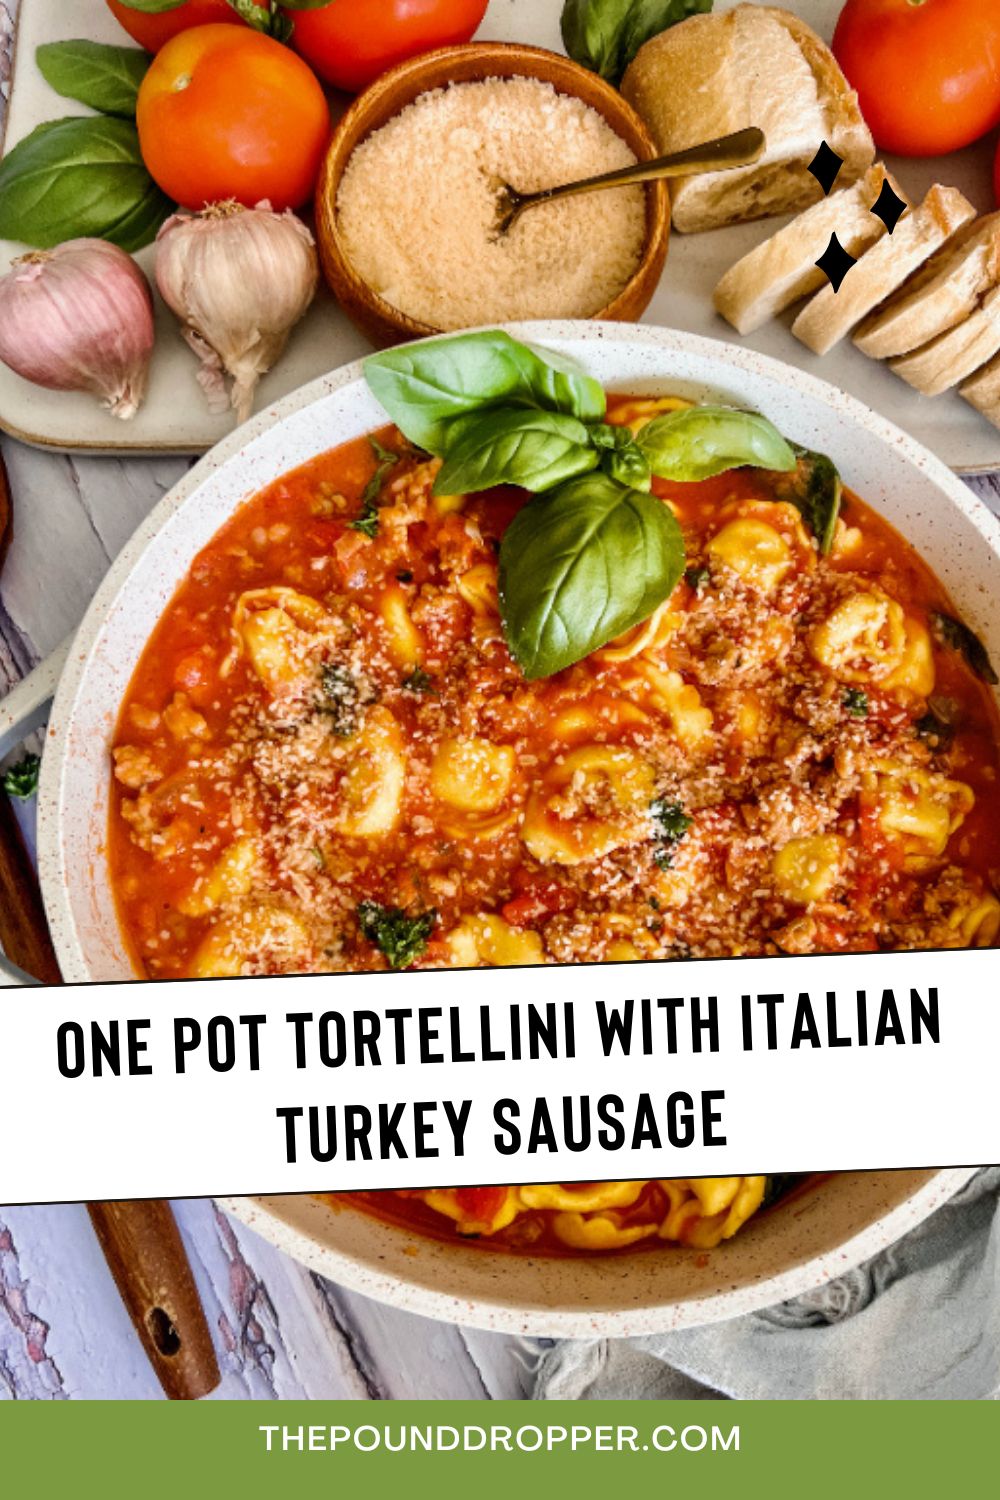 This One Pot Tortellini with Italian Turkey Sausage is an easy dinner idea made all in one pan for easy cleanup. It's family friendly, quick and easy-and irresistibly delicious!  via @pounddropper